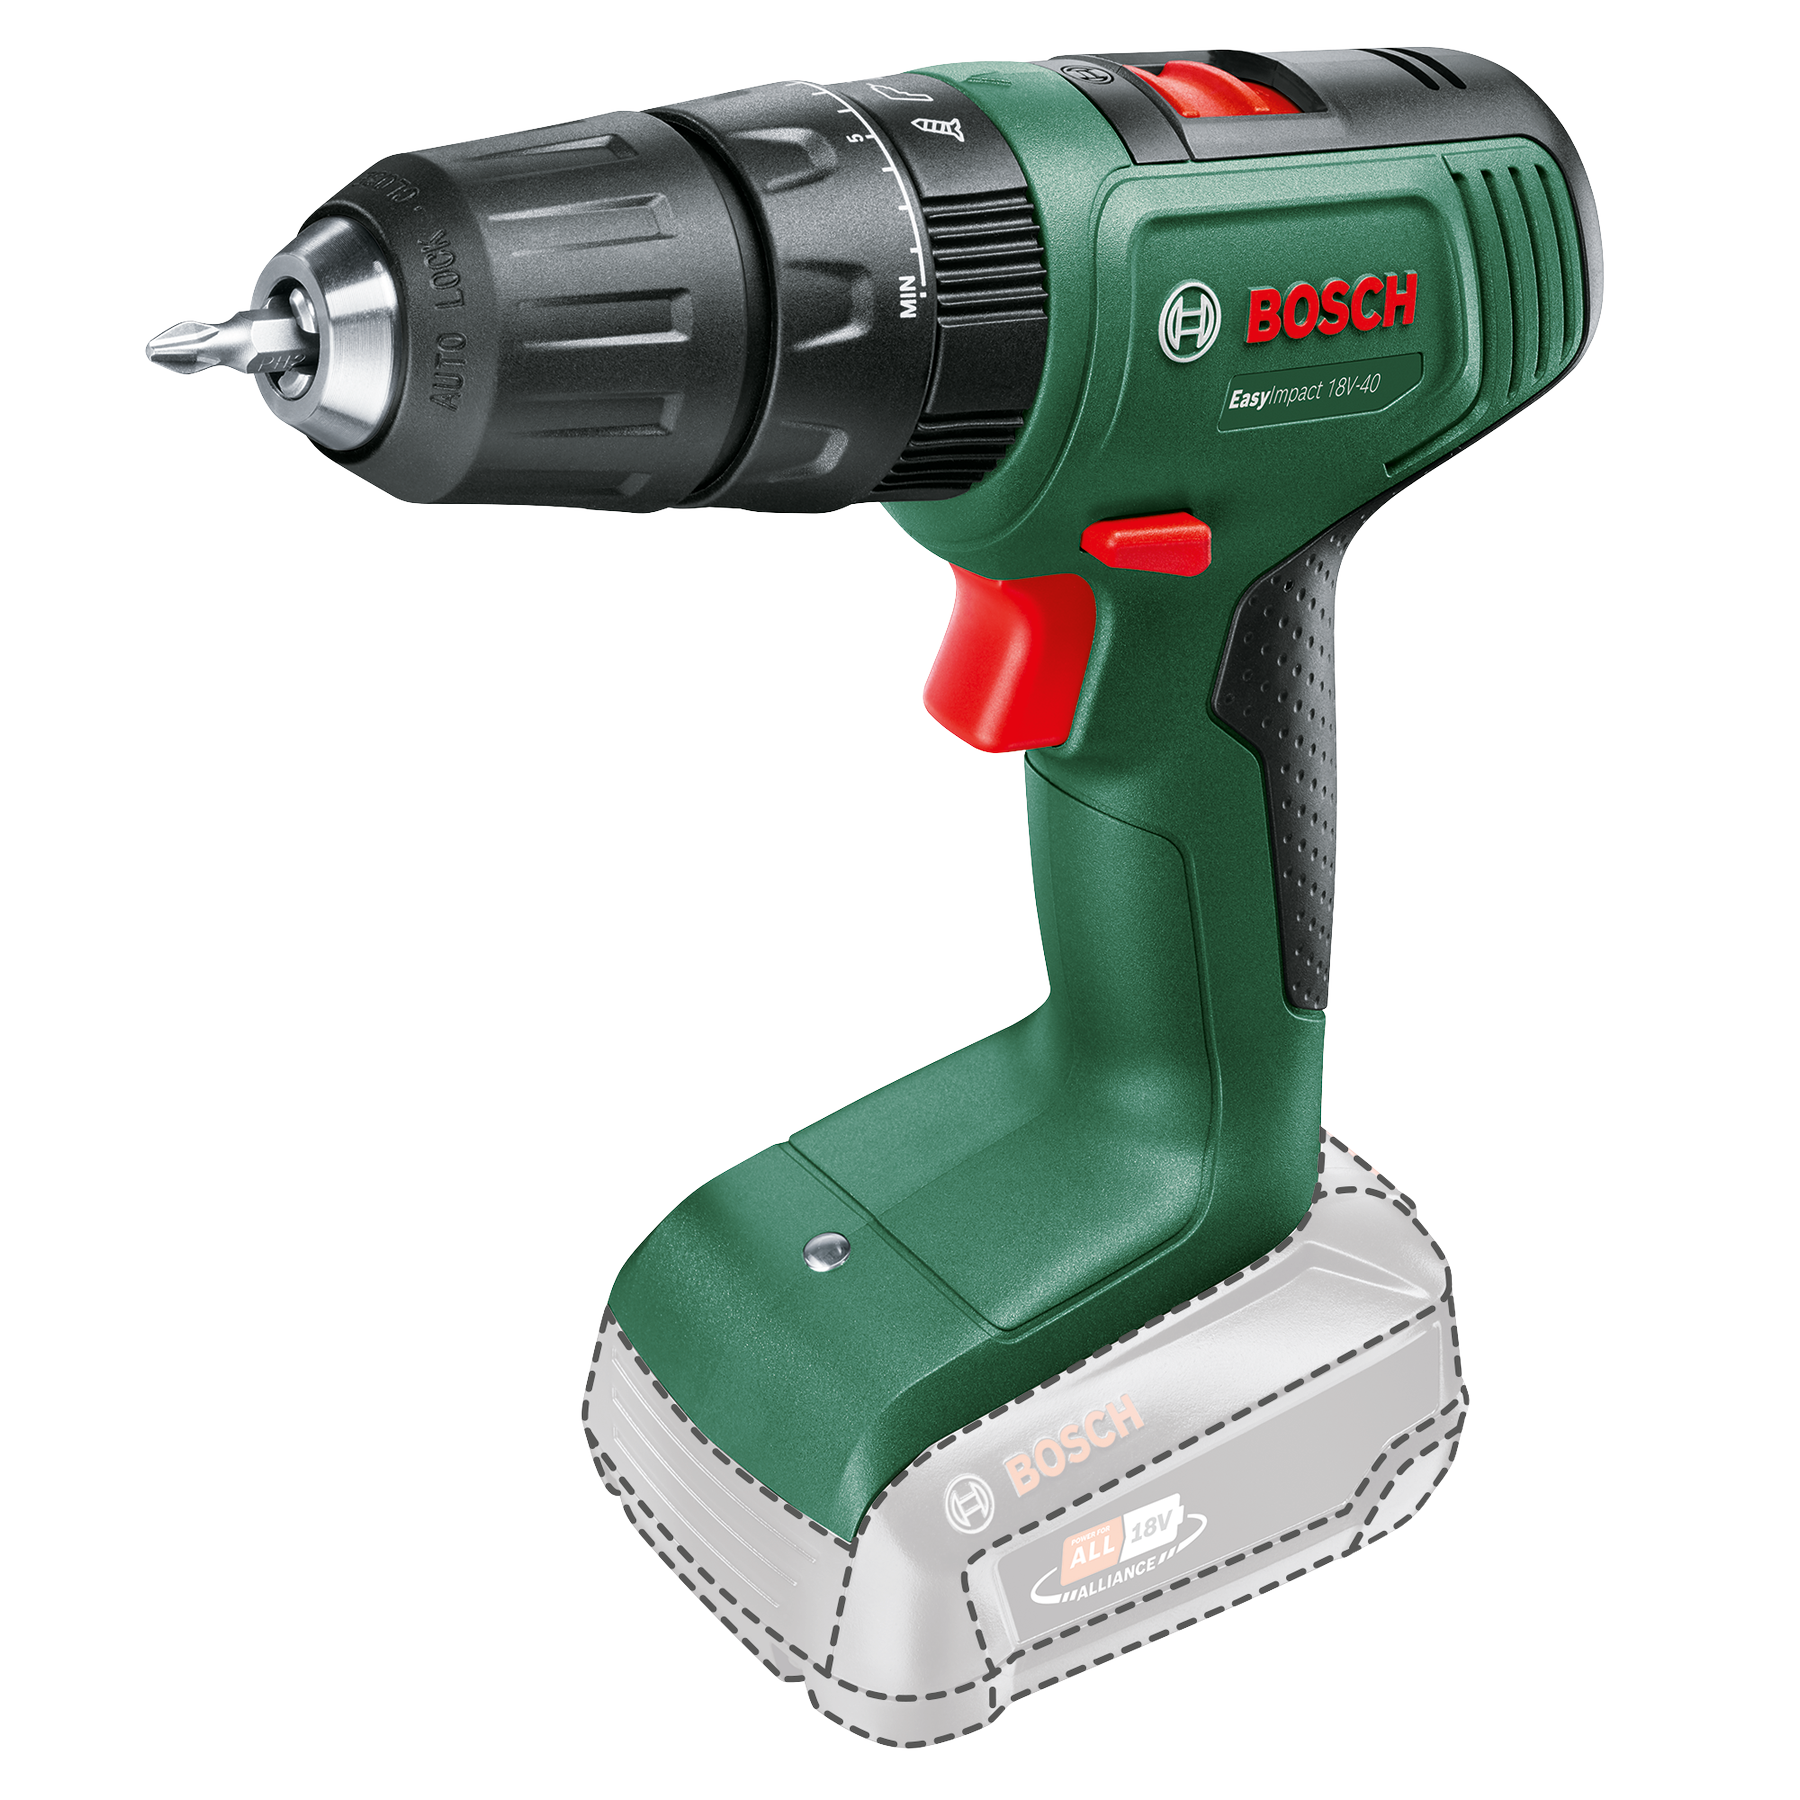 Vaccineren schroot deze EasyImpact 18V-40 - Without battery | Without charger | Bosch DIY Shop